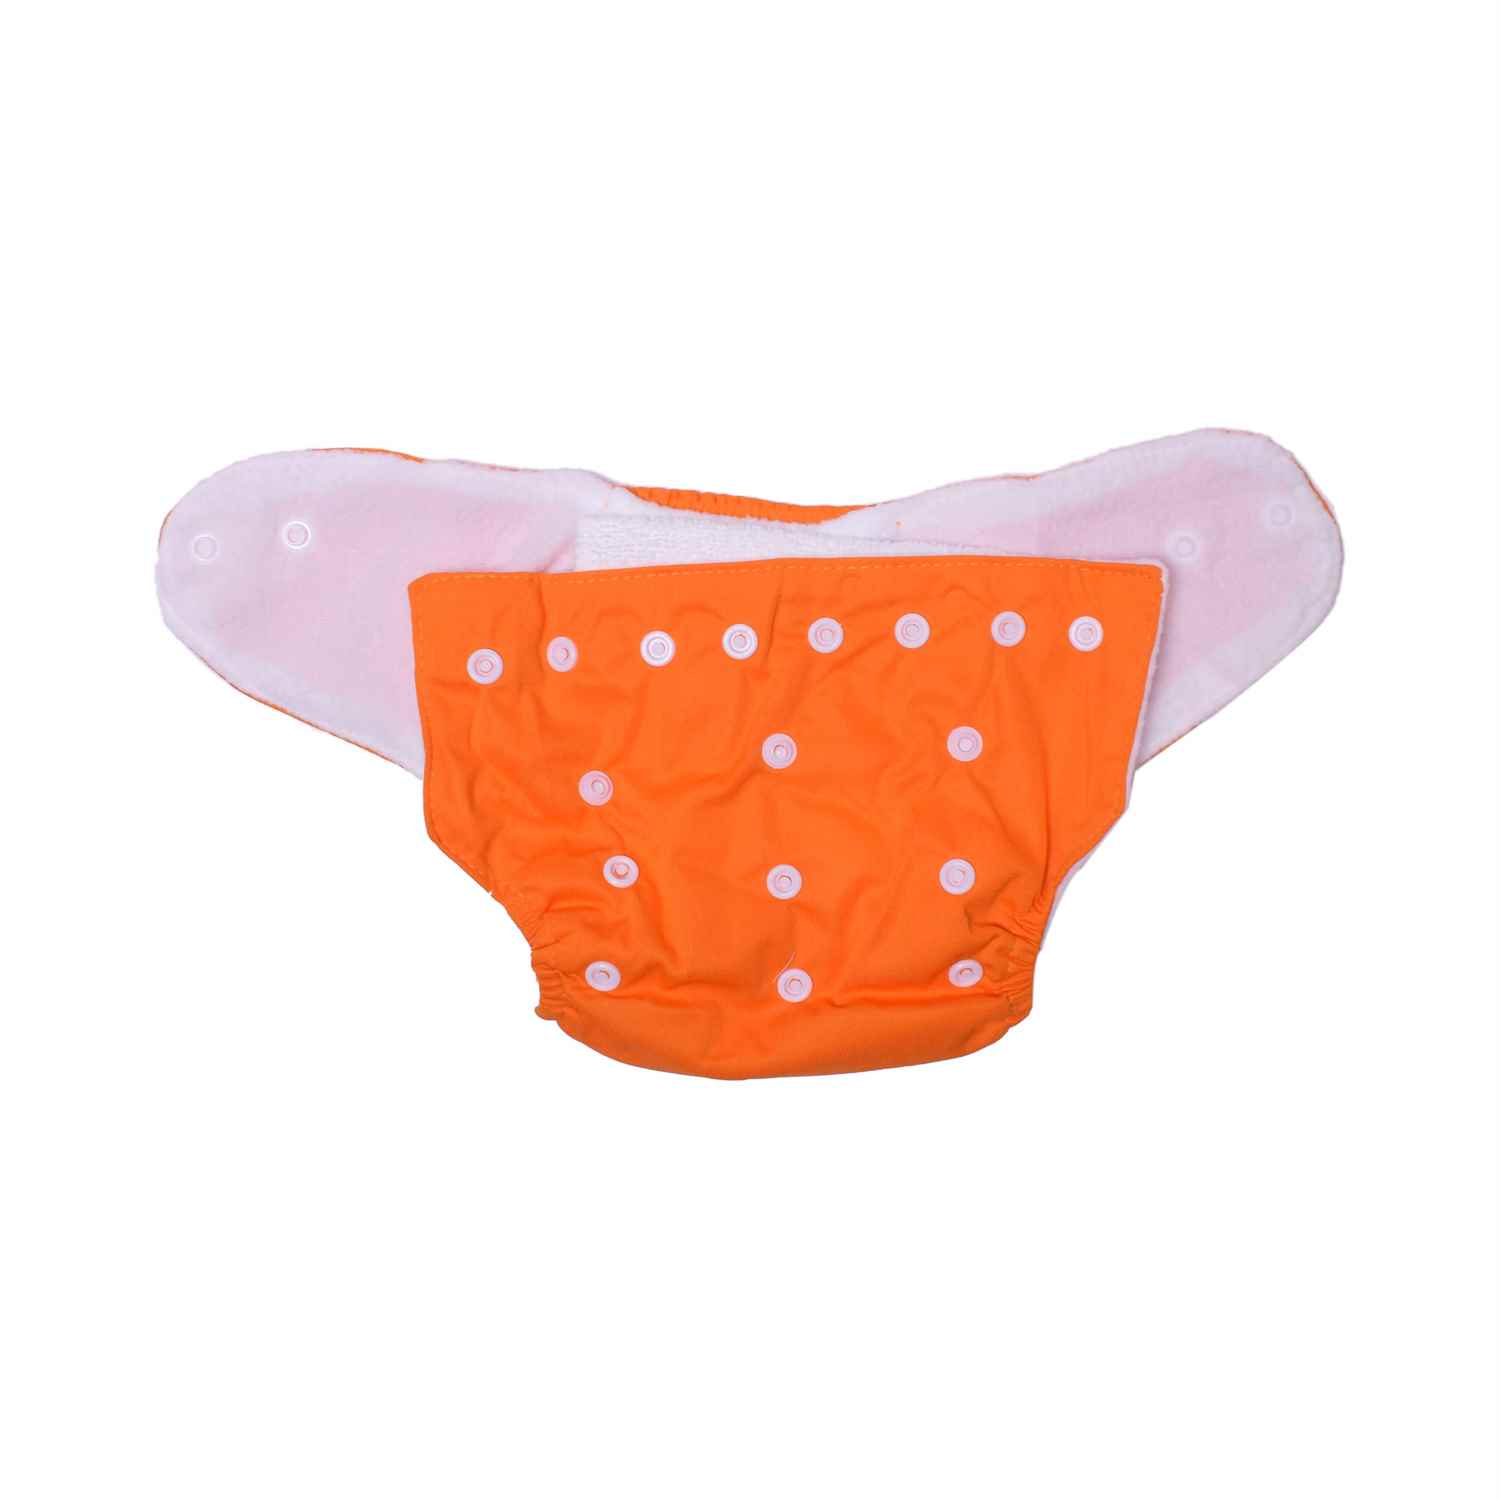 CHIEEA All-In-One Reusable Diaper Adjustable With Pad 0-24M